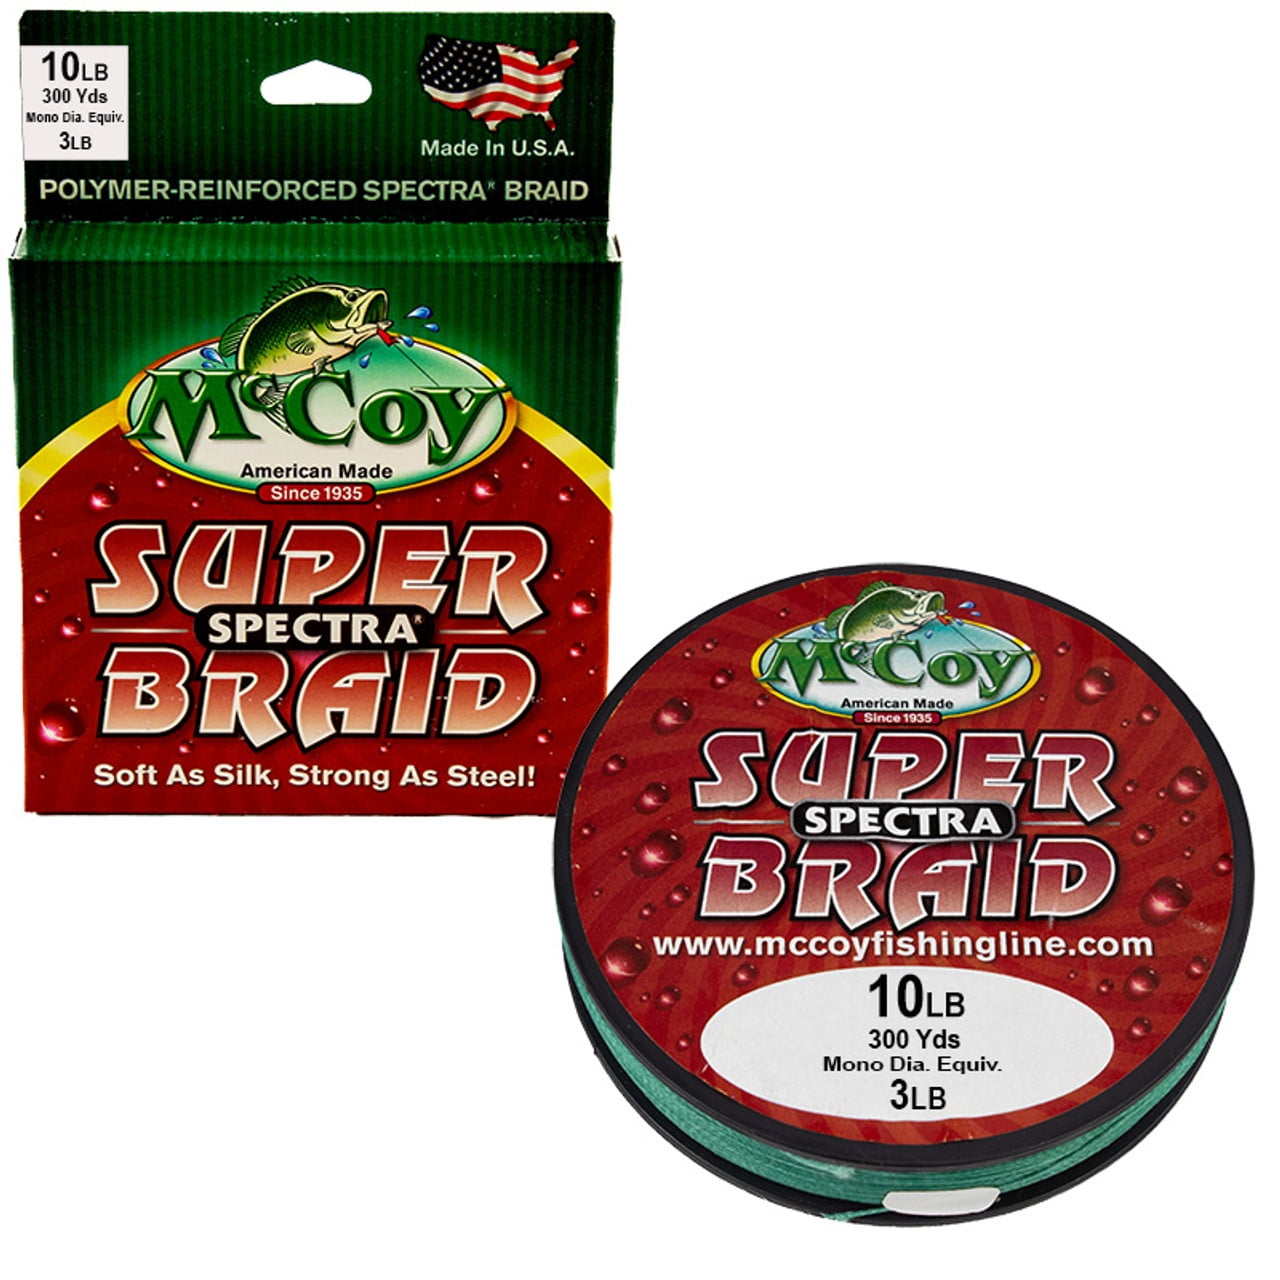 Mccoy Super Spectra Braid Mean Green Premium Tight Weave Braided Fishing Line (130lb Test (.019 inch Dia) - 150 Yards), Size: 130lb Test (.019 Dia) 